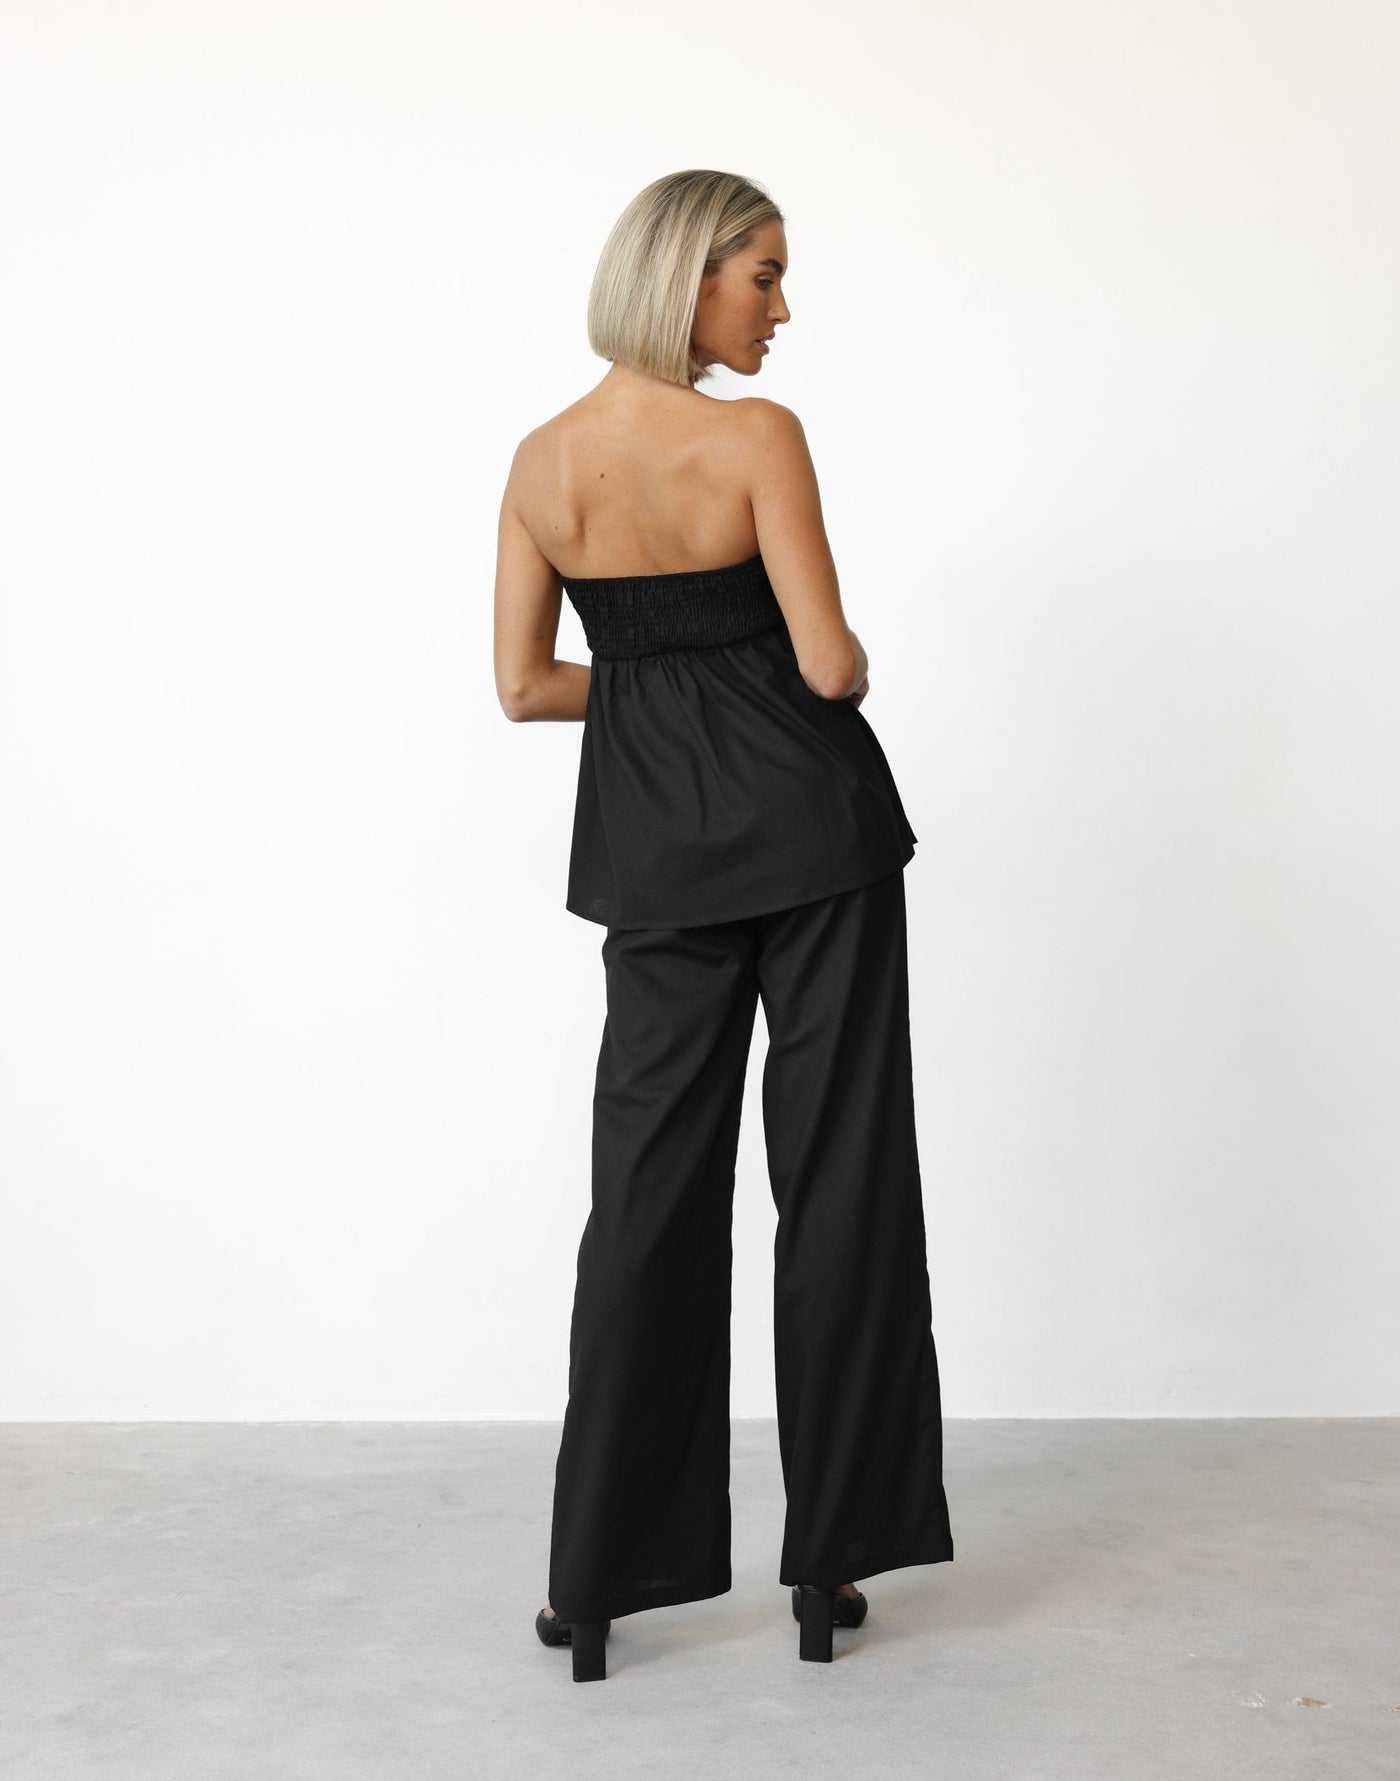 Tarsha Strapless Linen Top (Black) | CHARCOAL Exclusive - Strapless Peplum Style Top - Women's Top - Charcoal Clothing